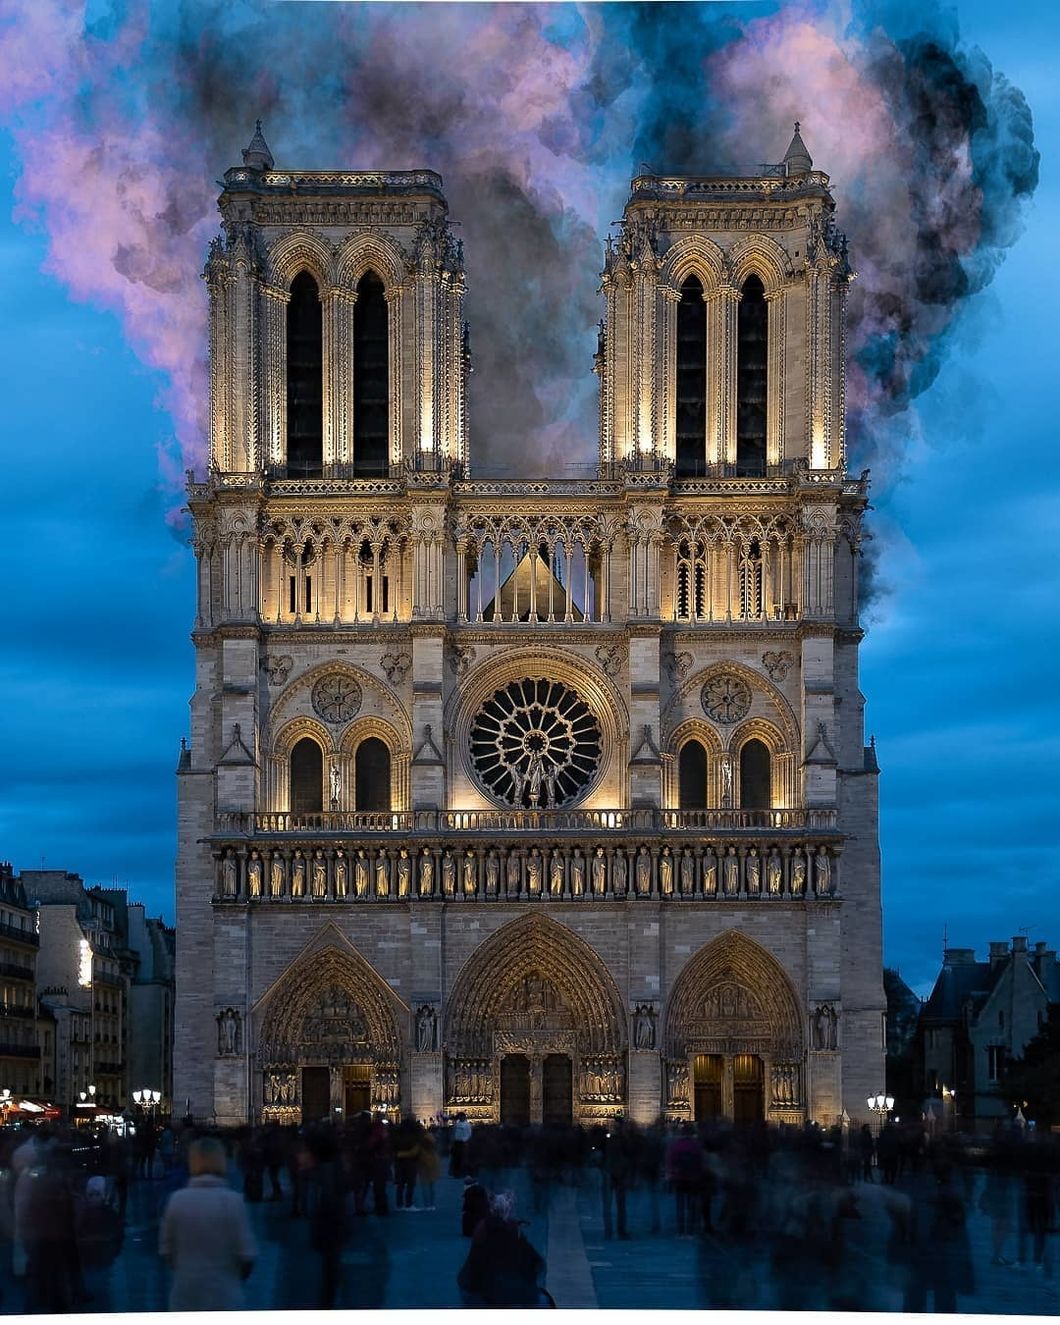 If We've Learned Anything From The Notre Dame Tragedy, It's That You Can't Wait To Explore The World